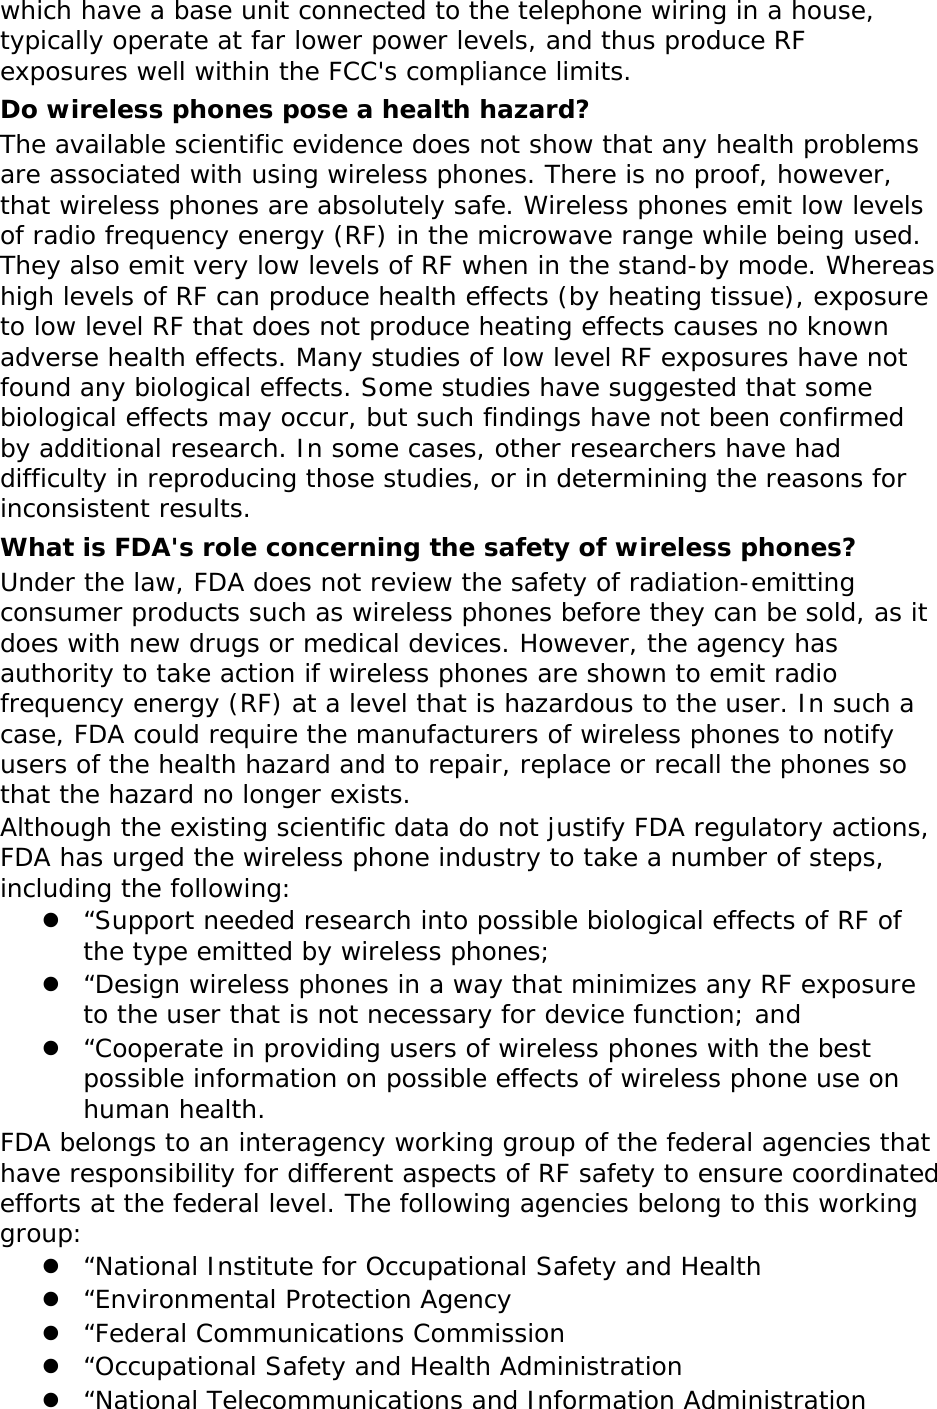 which have a base unit connected to the telephone wiring in a house, typically operate at far lower power levels, and thus produce RF exposures well within the FCC&apos;s compliance limits. Do wireless phones pose a health hazard? The available scientific evidence does not show that any health problems are associated with using wireless phones. There is no proof, however, that wireless phones are absolutely safe. Wireless phones emit low levels of radio frequency energy (RF) in the microwave range while being used. They also emit very low levels of RF when in the stand-by mode. Whereas high levels of RF can produce health effects (by heating tissue), exposure to low level RF that does not produce heating effects causes no known adverse health effects. Many studies of low level RF exposures have not found any biological effects. Some studies have suggested that some biological effects may occur, but such findings have not been confirmed by additional research. In some cases, other researchers have had difficulty in reproducing those studies, or in determining the reasons for inconsistent results. What is FDA&apos;s role concerning the safety of wireless phones? Under the law, FDA does not review the safety of radiation-emitting consumer products such as wireless phones before they can be sold, as it does with new drugs or medical devices. However, the agency has authority to take action if wireless phones are shown to emit radio frequency energy (RF) at a level that is hazardous to the user. In such a case, FDA could require the manufacturers of wireless phones to notify users of the health hazard and to repair, replace or recall the phones so that the hazard no longer exists. Although the existing scientific data do not justify FDA regulatory actions, FDA has urged the wireless phone industry to take a number of steps, including the following: z “Support needed research into possible biological effects of RF of the type emitted by wireless phones; z “Design wireless phones in a way that minimizes any RF exposure to the user that is not necessary for device function; and z “Cooperate in providing users of wireless phones with the best possible information on possible effects of wireless phone use on human health. FDA belongs to an interagency working group of the federal agencies that have responsibility for different aspects of RF safety to ensure coordinated efforts at the federal level. The following agencies belong to this working group: z “National Institute for Occupational Safety and Health z “Environmental Protection Agency z “Federal Communications Commission z “Occupational Safety and Health Administration z “National Telecommunications and Information Administration 